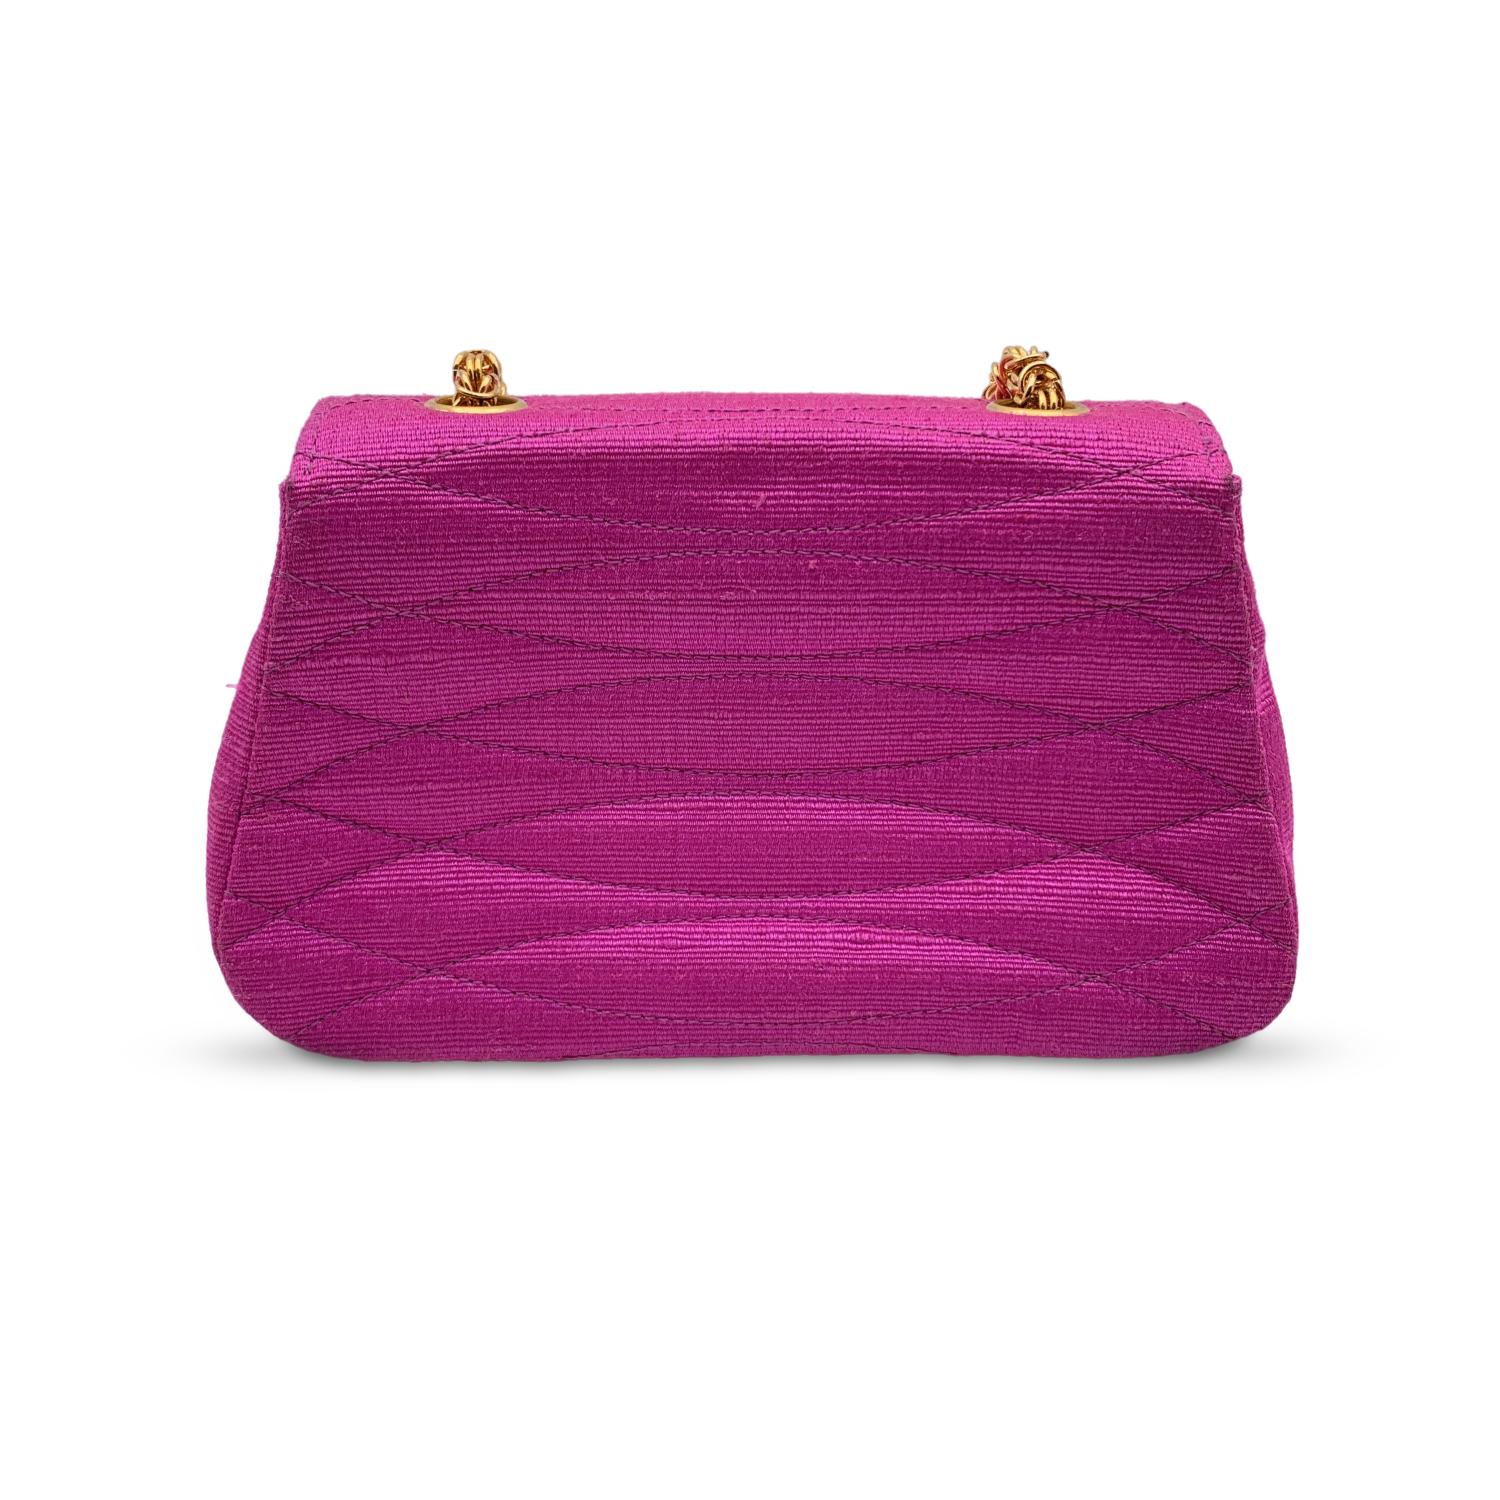 This beautiful Bag will come with a Certificate of Authenticity provided by Entrupy. The certificate will be provided at no further cost.

Elegant Chanel evening bag in pink quilted canvas with gold metal chain strap. Period/Era: 1991-1994. Gold